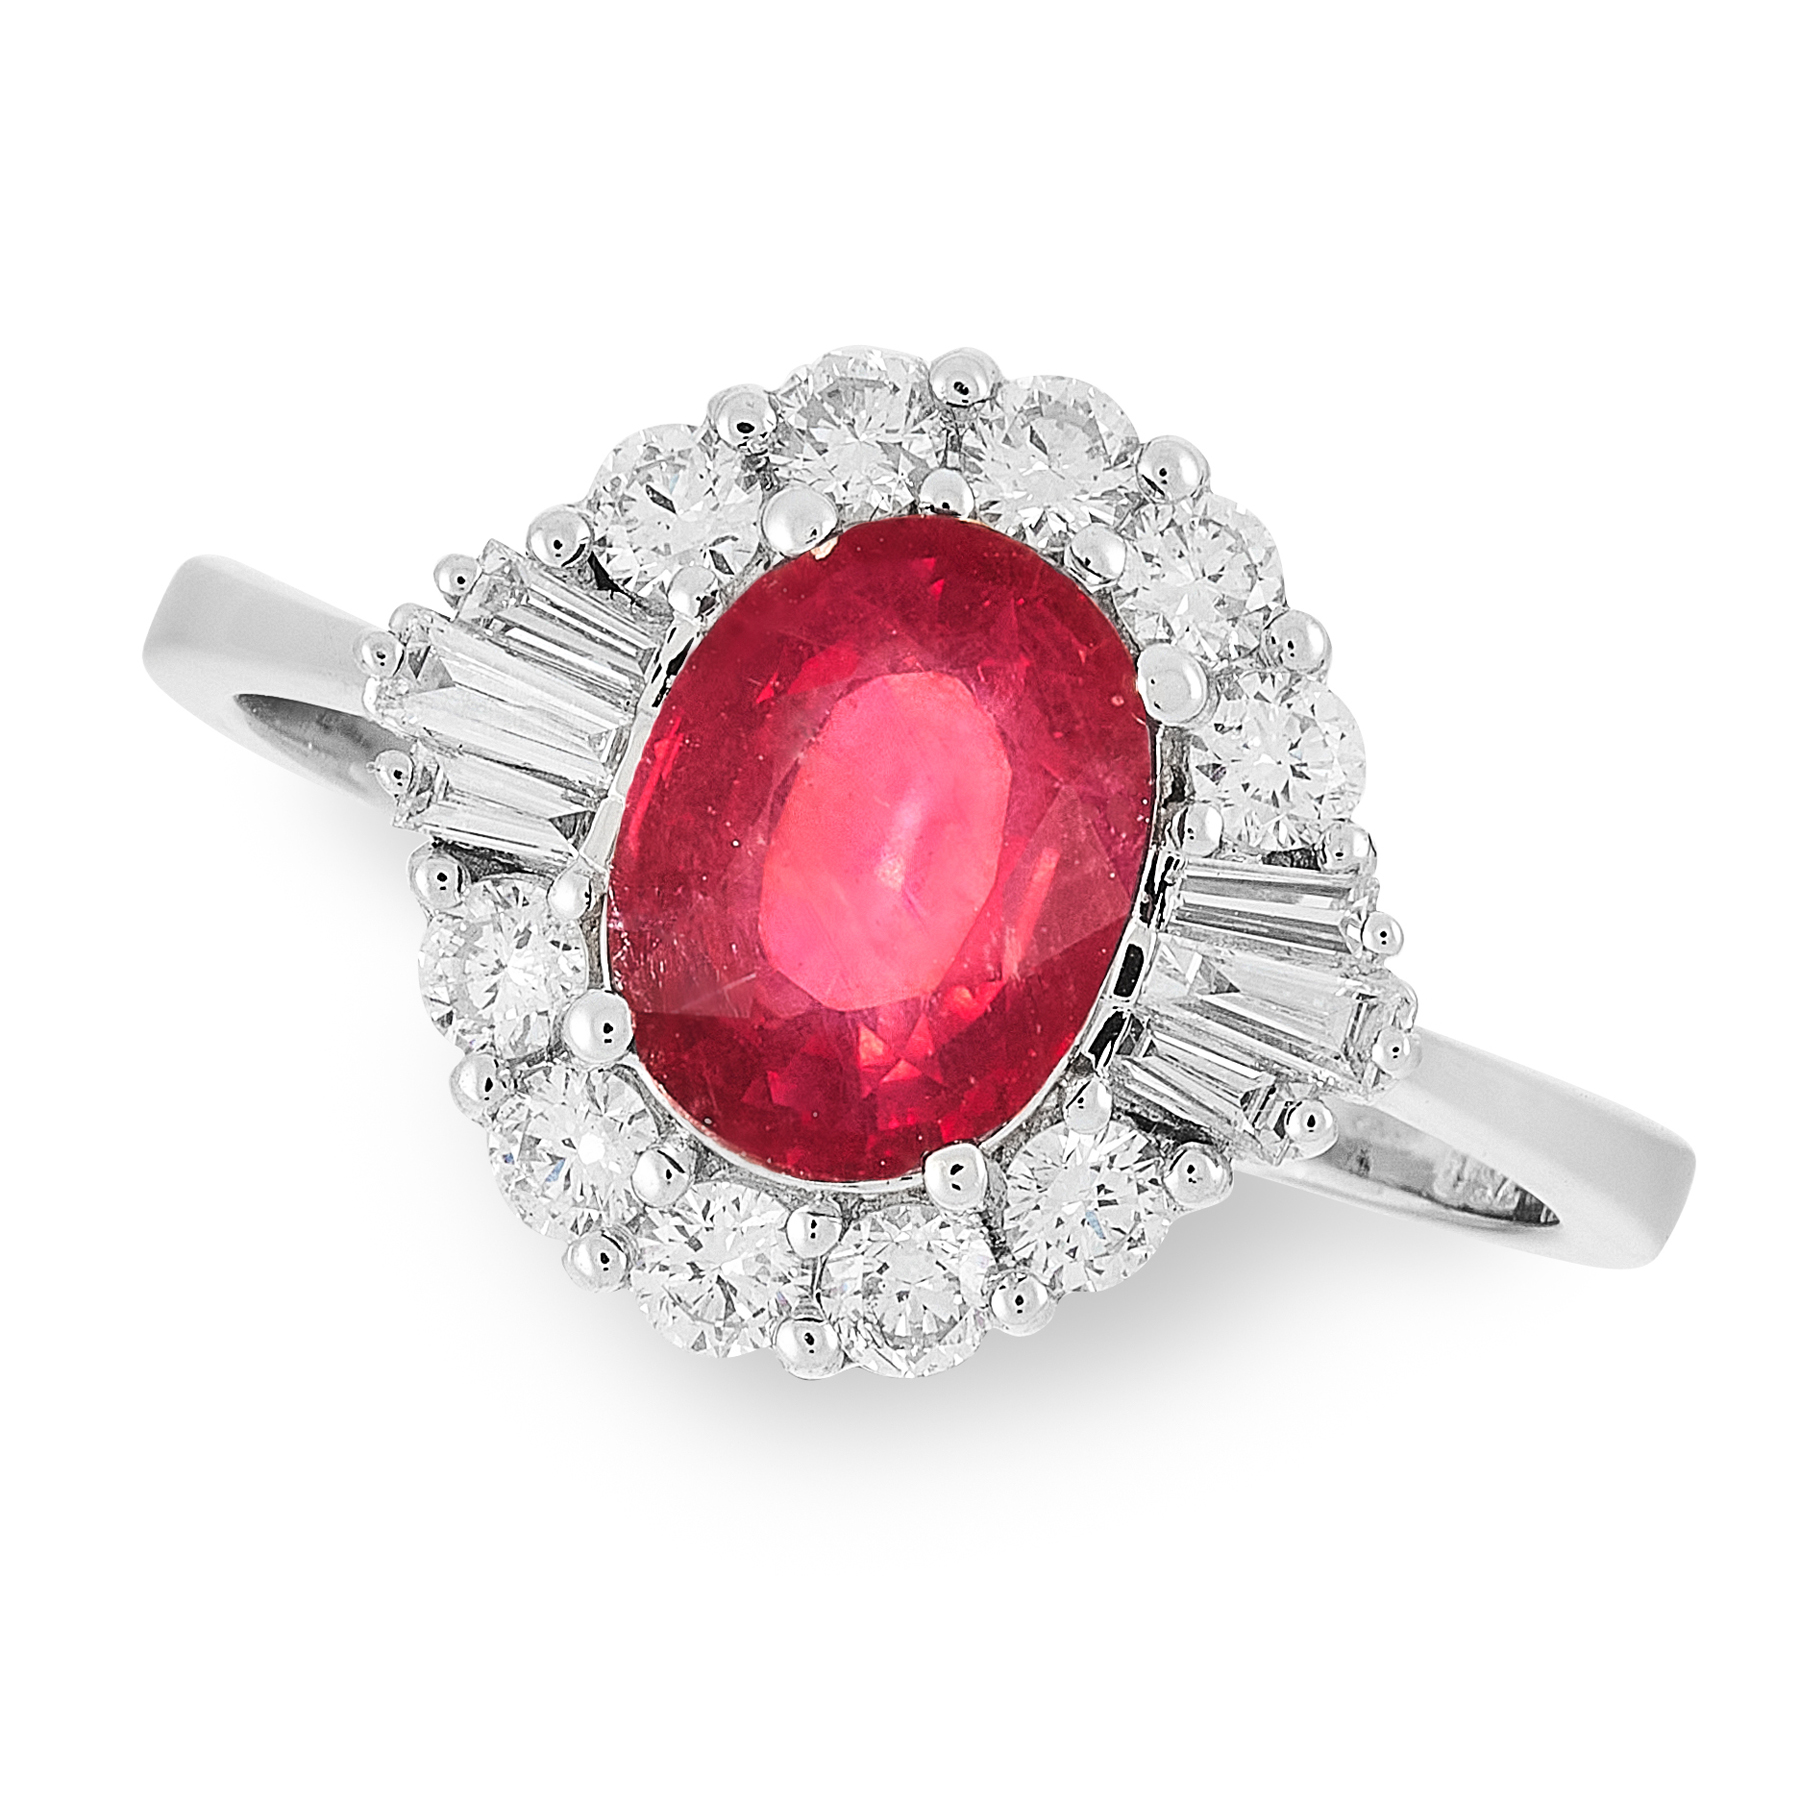 A RUBY AND DIAMOND DRESS RING in 18ct white gold, set with an oval cut ruby of 1.93 carats, within a